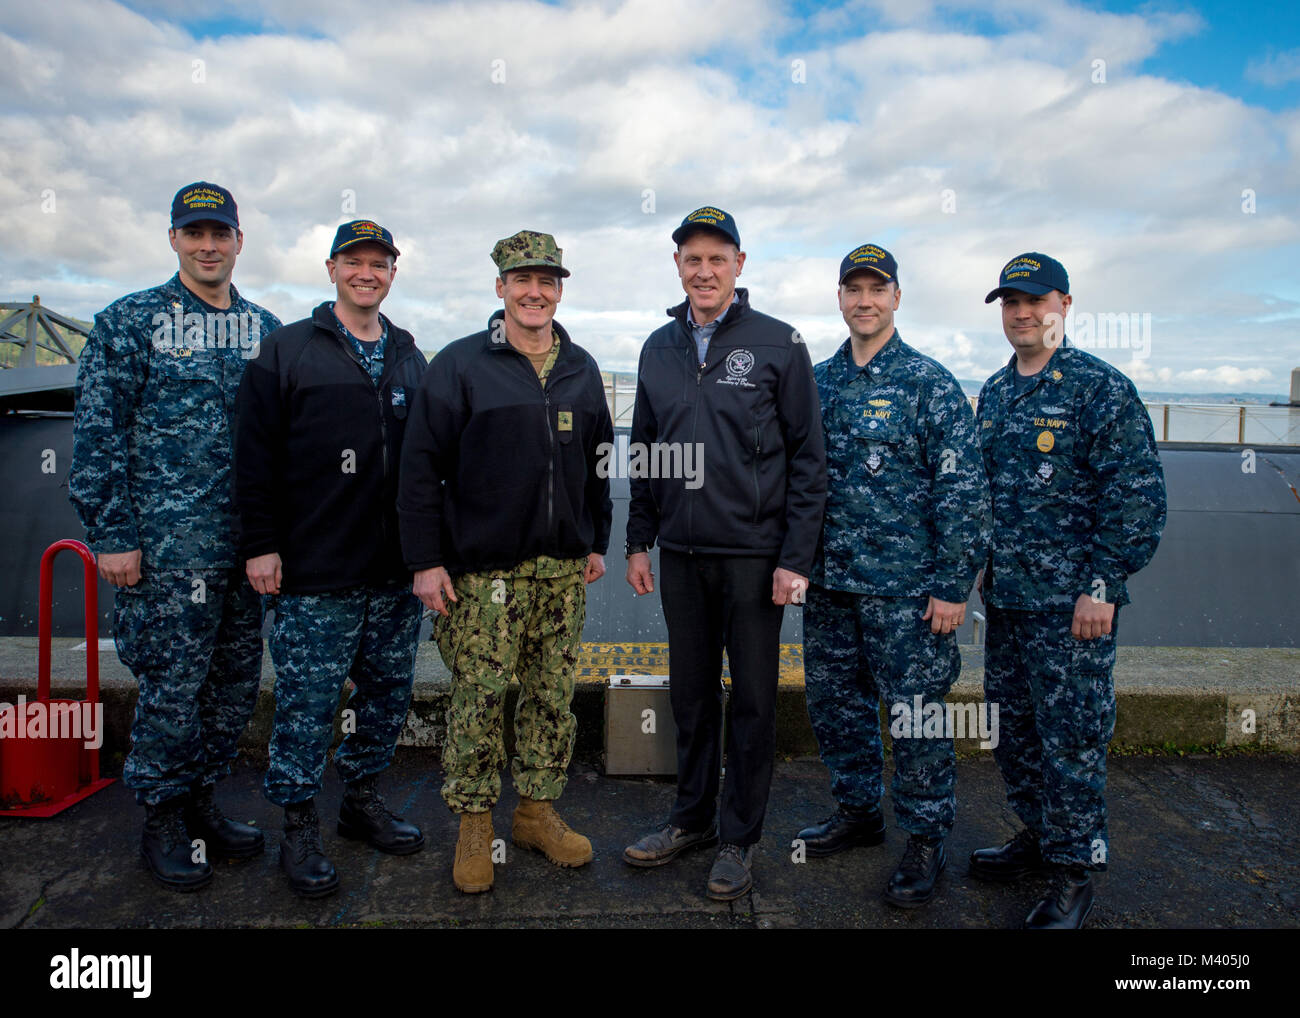 BANGOR, Wash. (Feb. 9, 2018) Deputy Secretary of Defense Patrick Shanahan visited staff and facilities assigned to Commander Submarine Group 9 at Naval Base Kistap-Bangor,  Washington on a tour highlighting the strategic deterrence mission. (U.S. Navy photo by Mass Communication Specialist 2nd Class Nancy C. diBenedetto/Released) Stock Photo